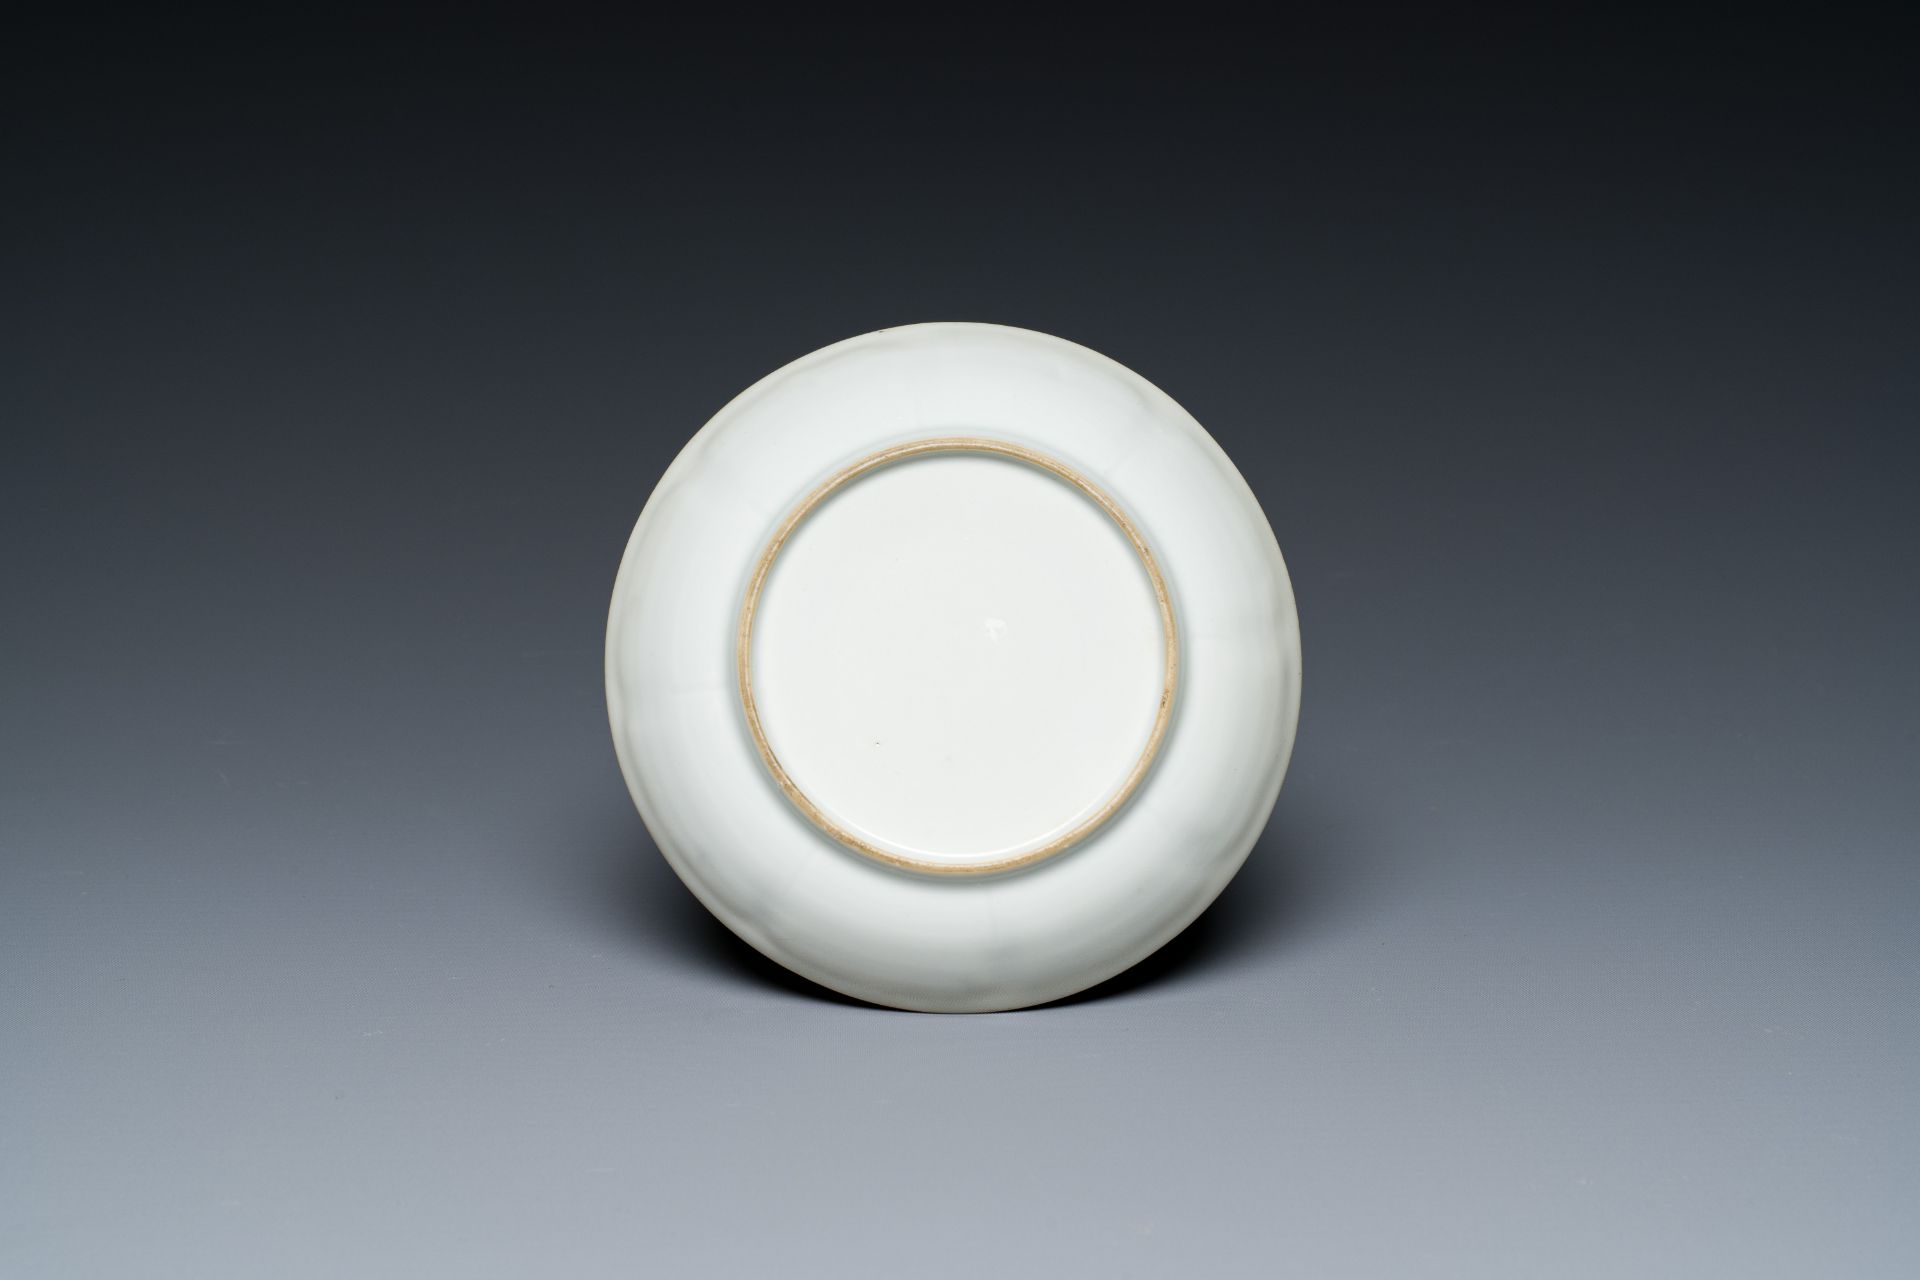 A varied collection of Chinese porcelain, 18/19th C. - Image 9 of 9